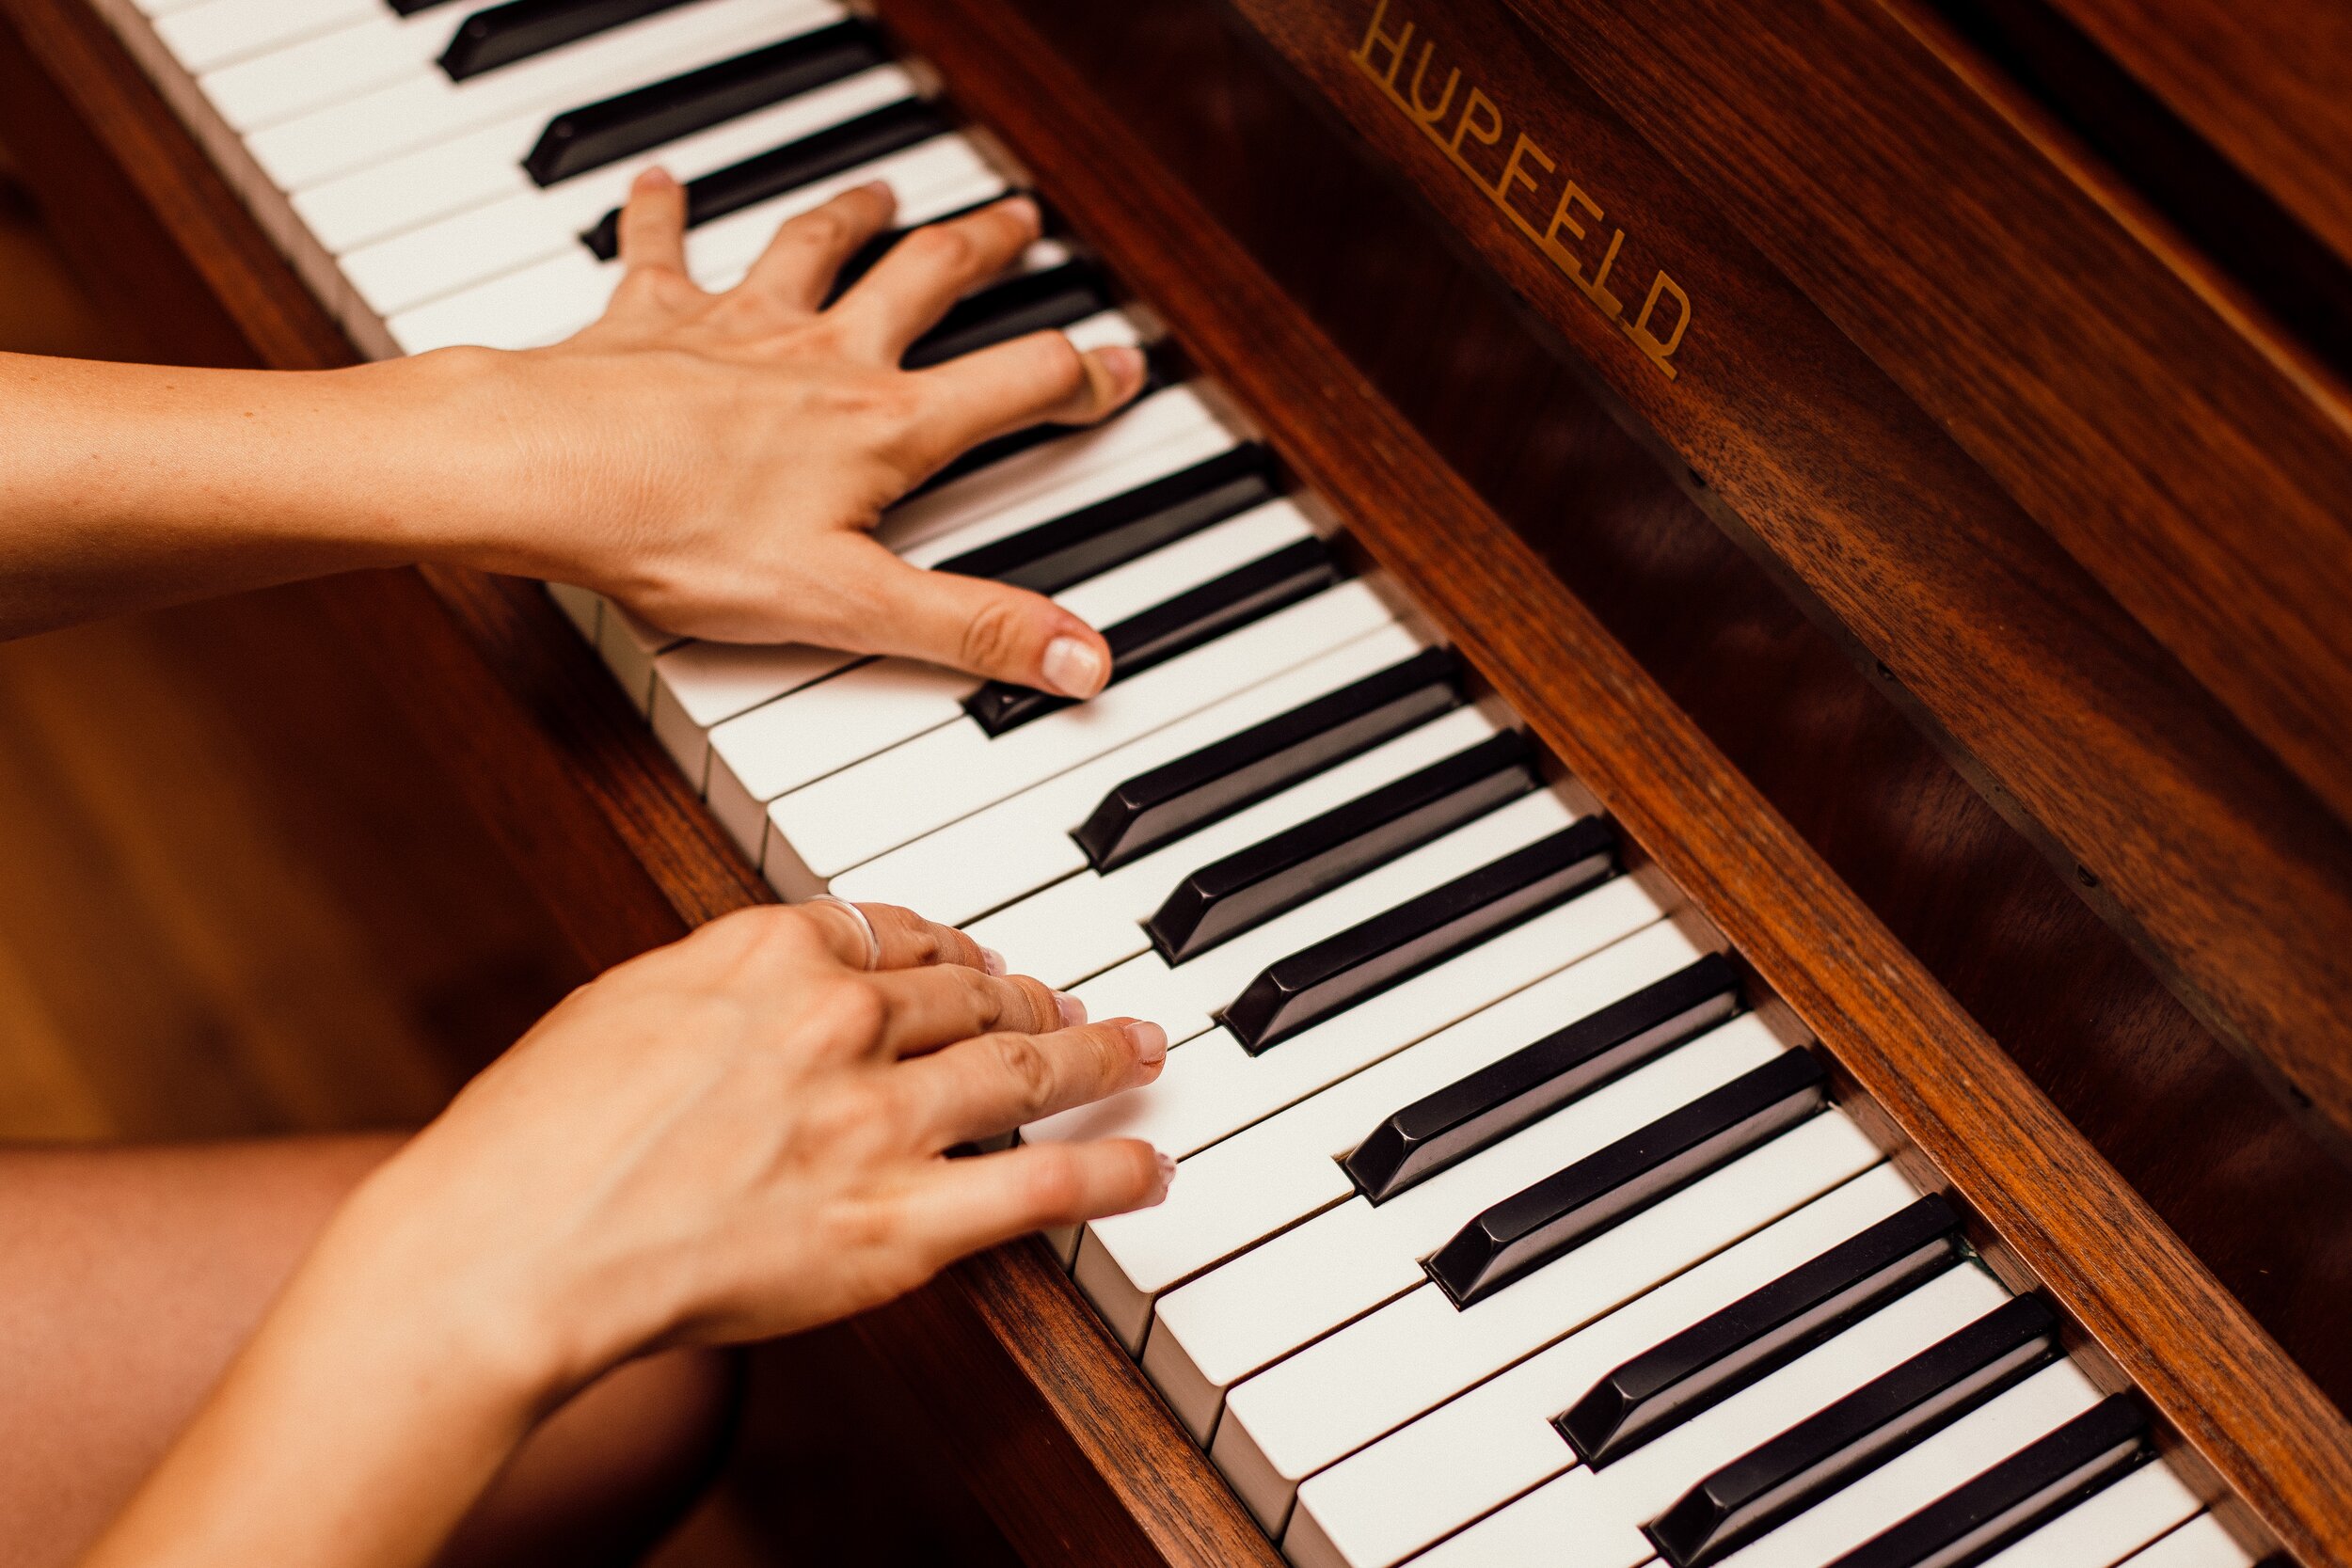 close-up-photo-of-person-playing-piano-1246437.jpg